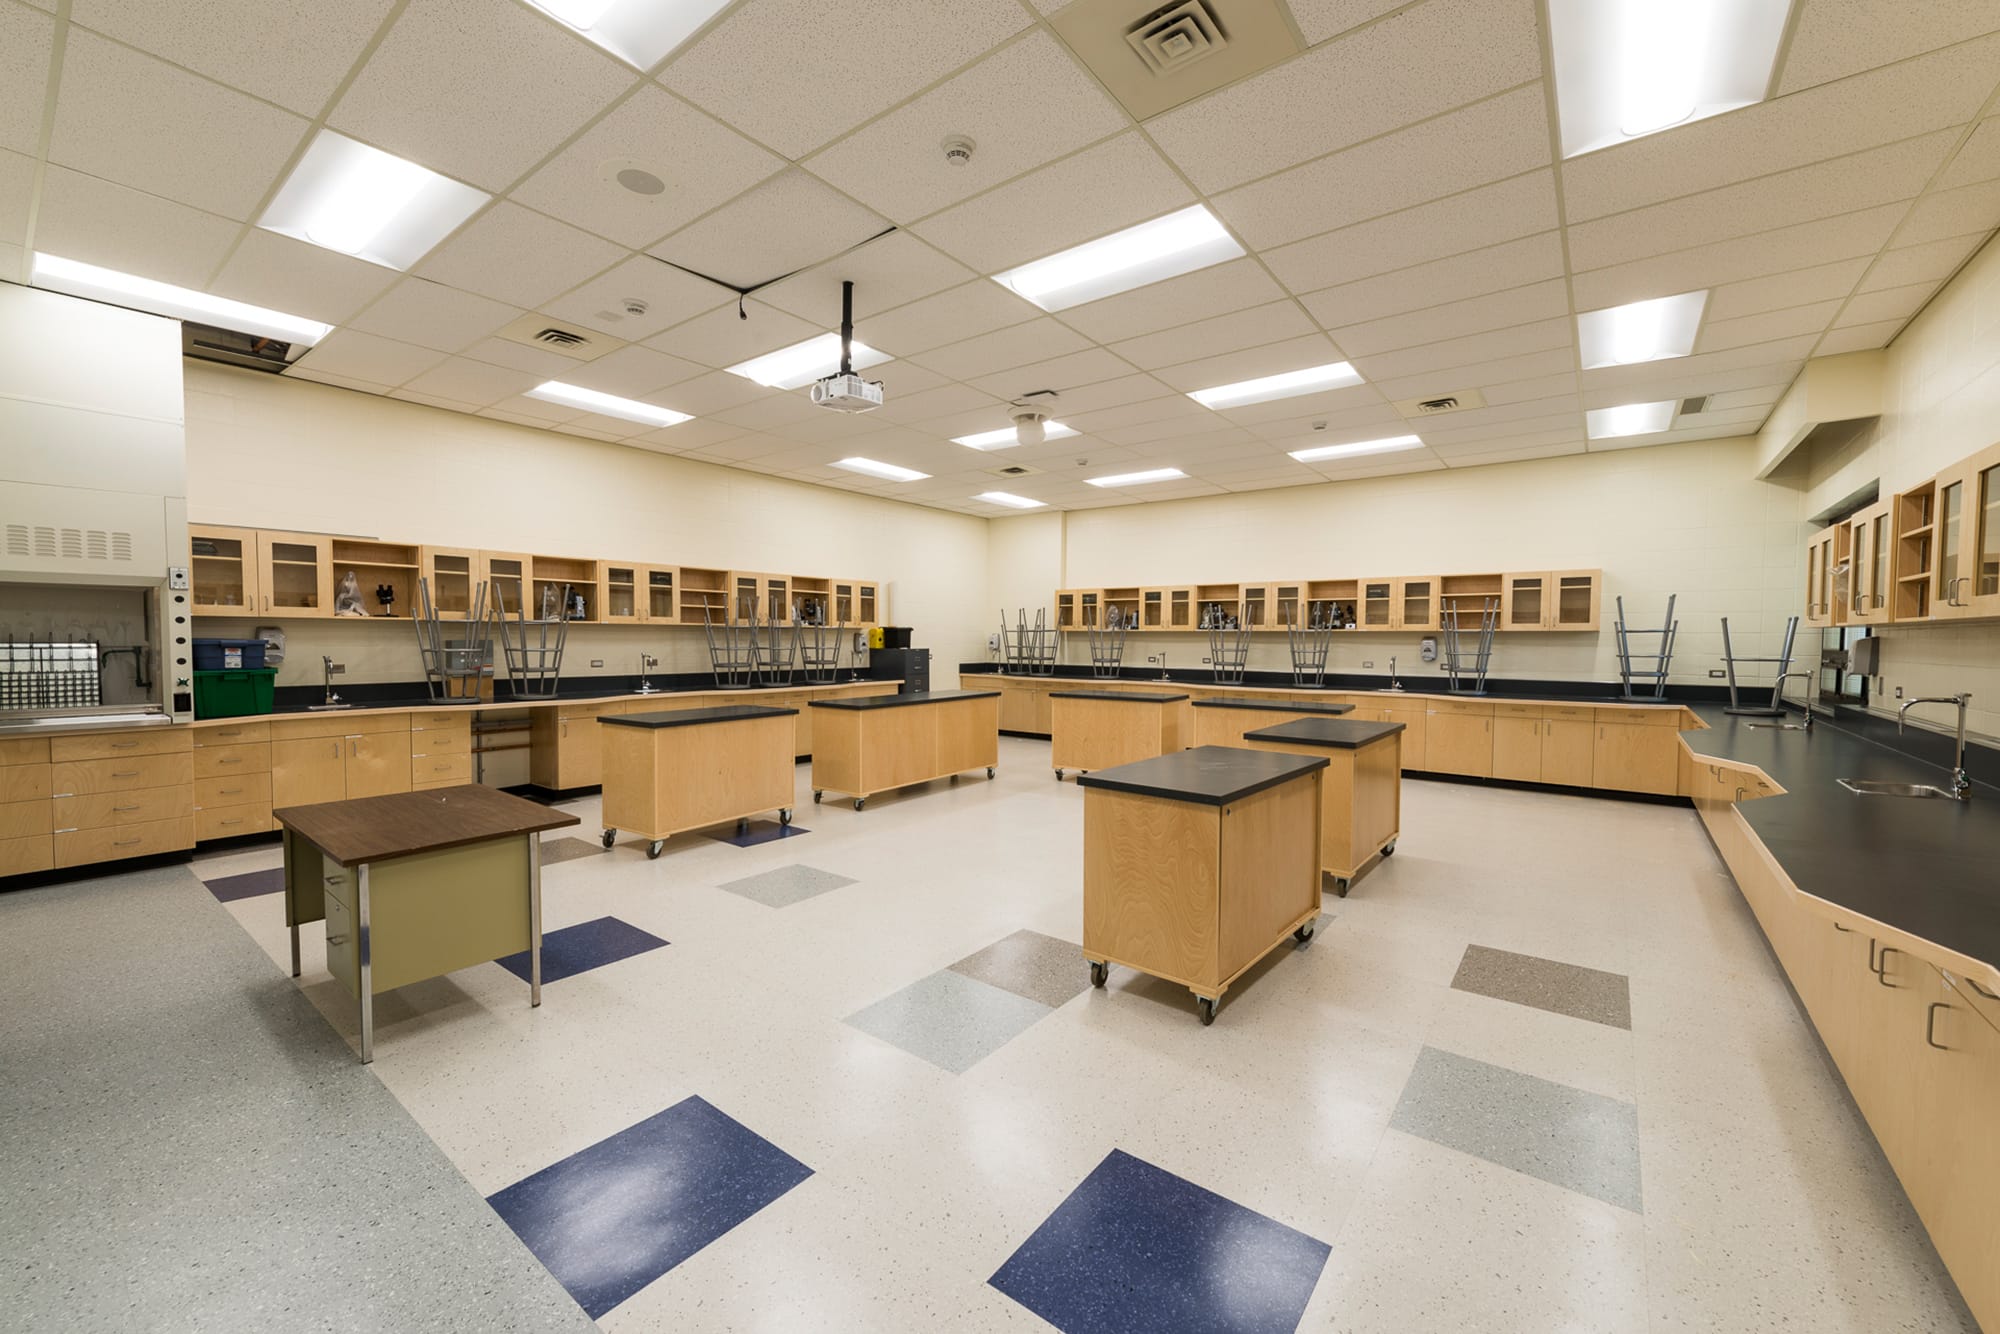 Our Lady of Mount Pleasant School interior lab